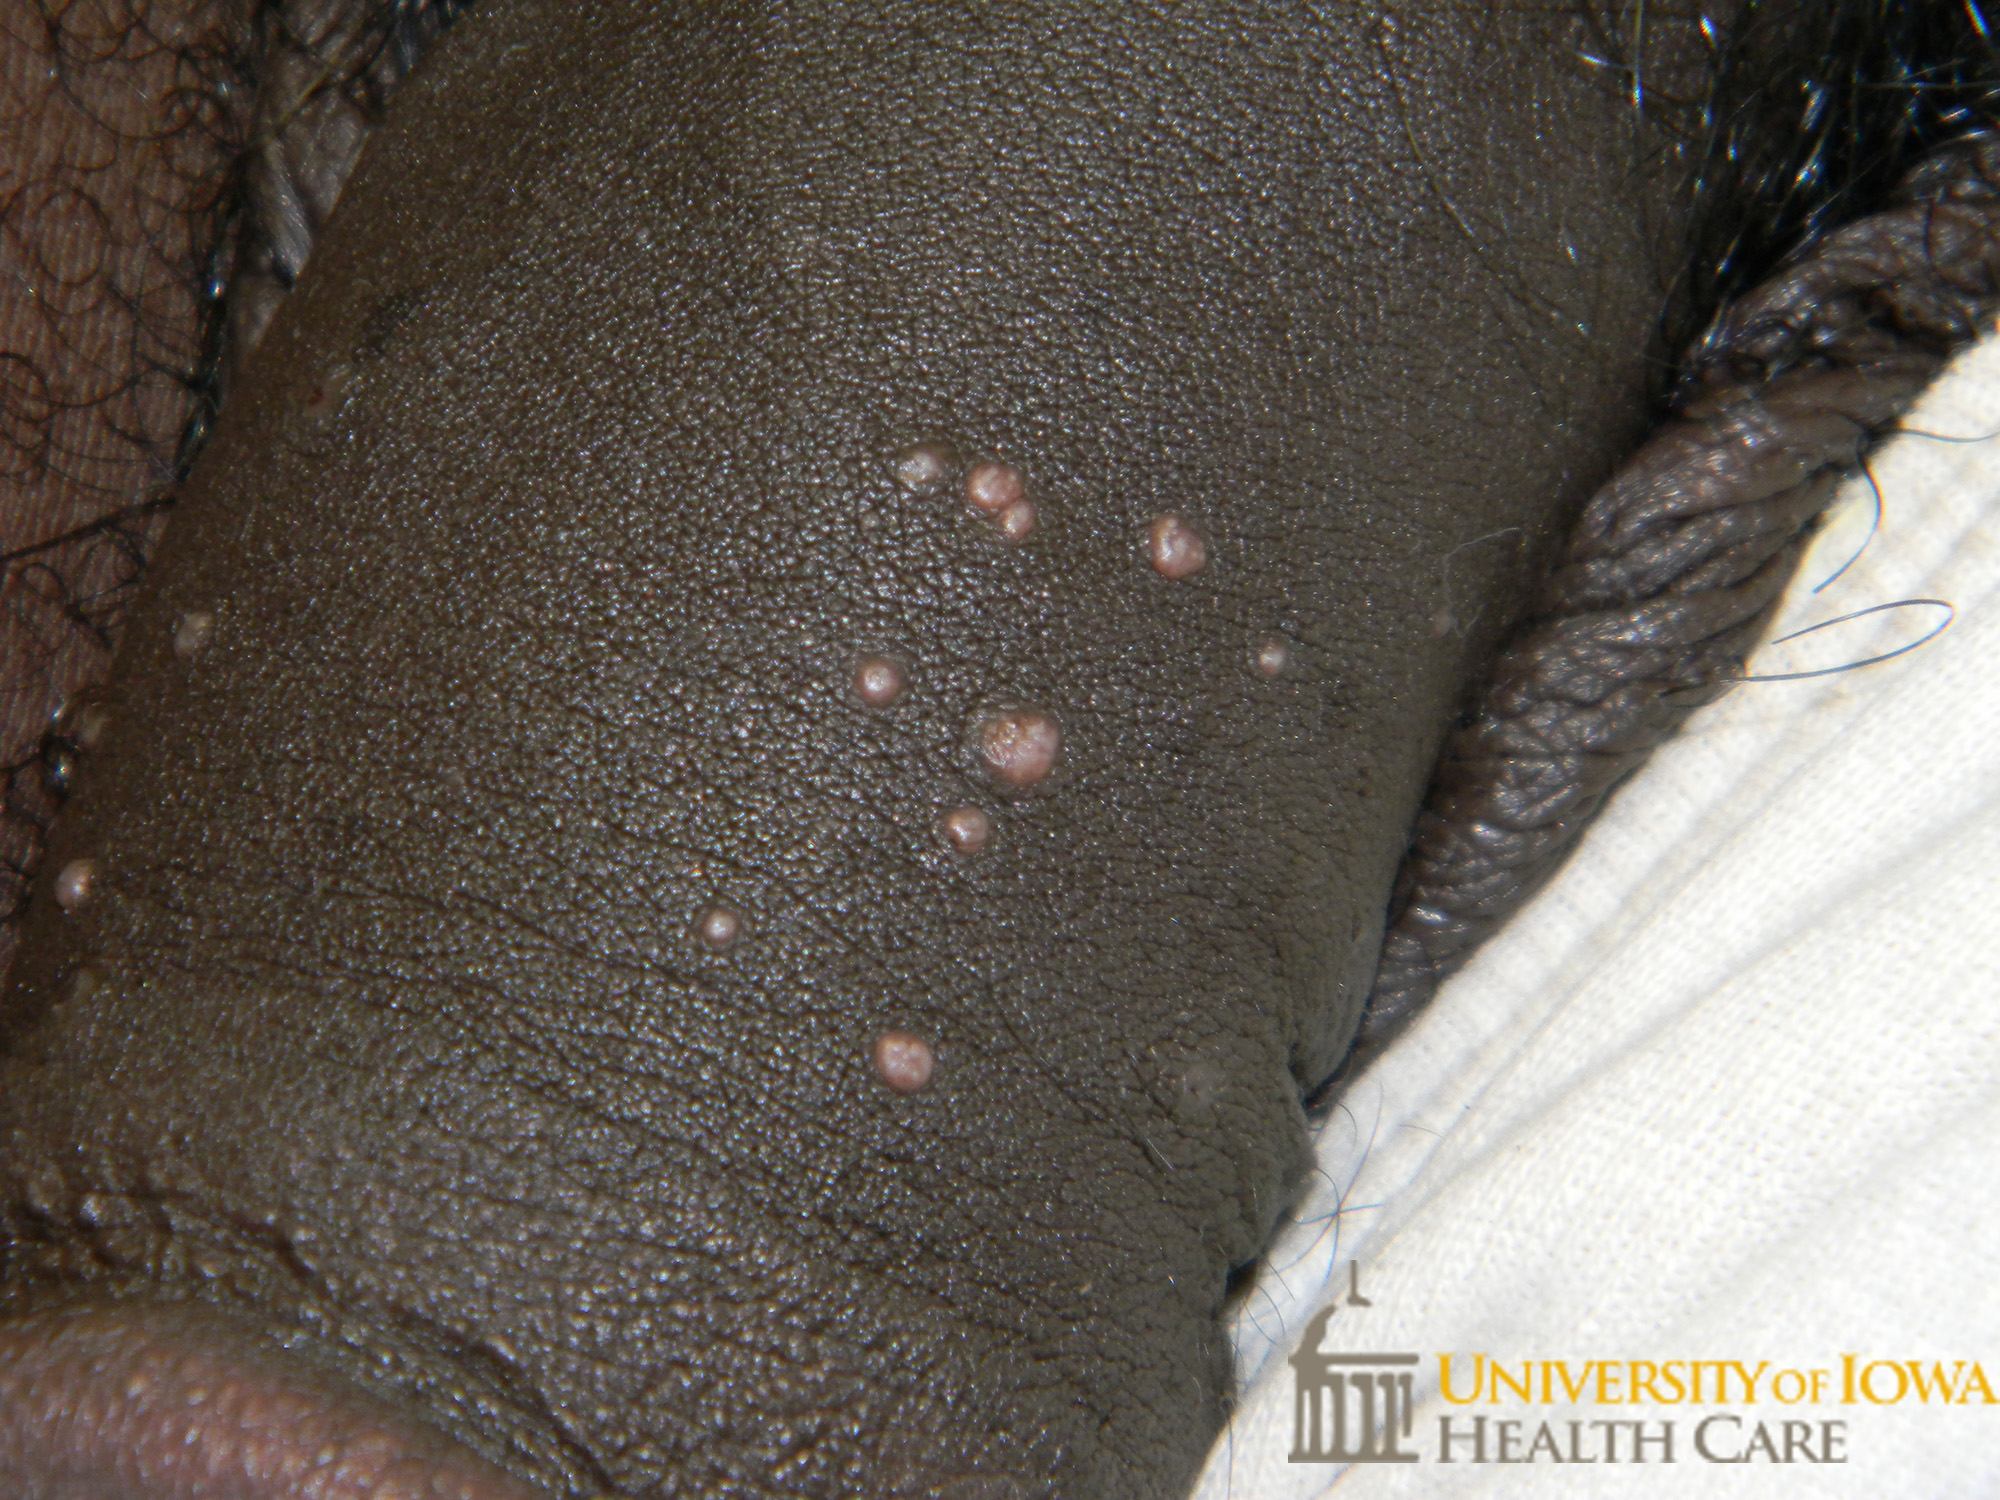 Pink papules with central umbilication on the penile shaft. (click images for higher resolution).